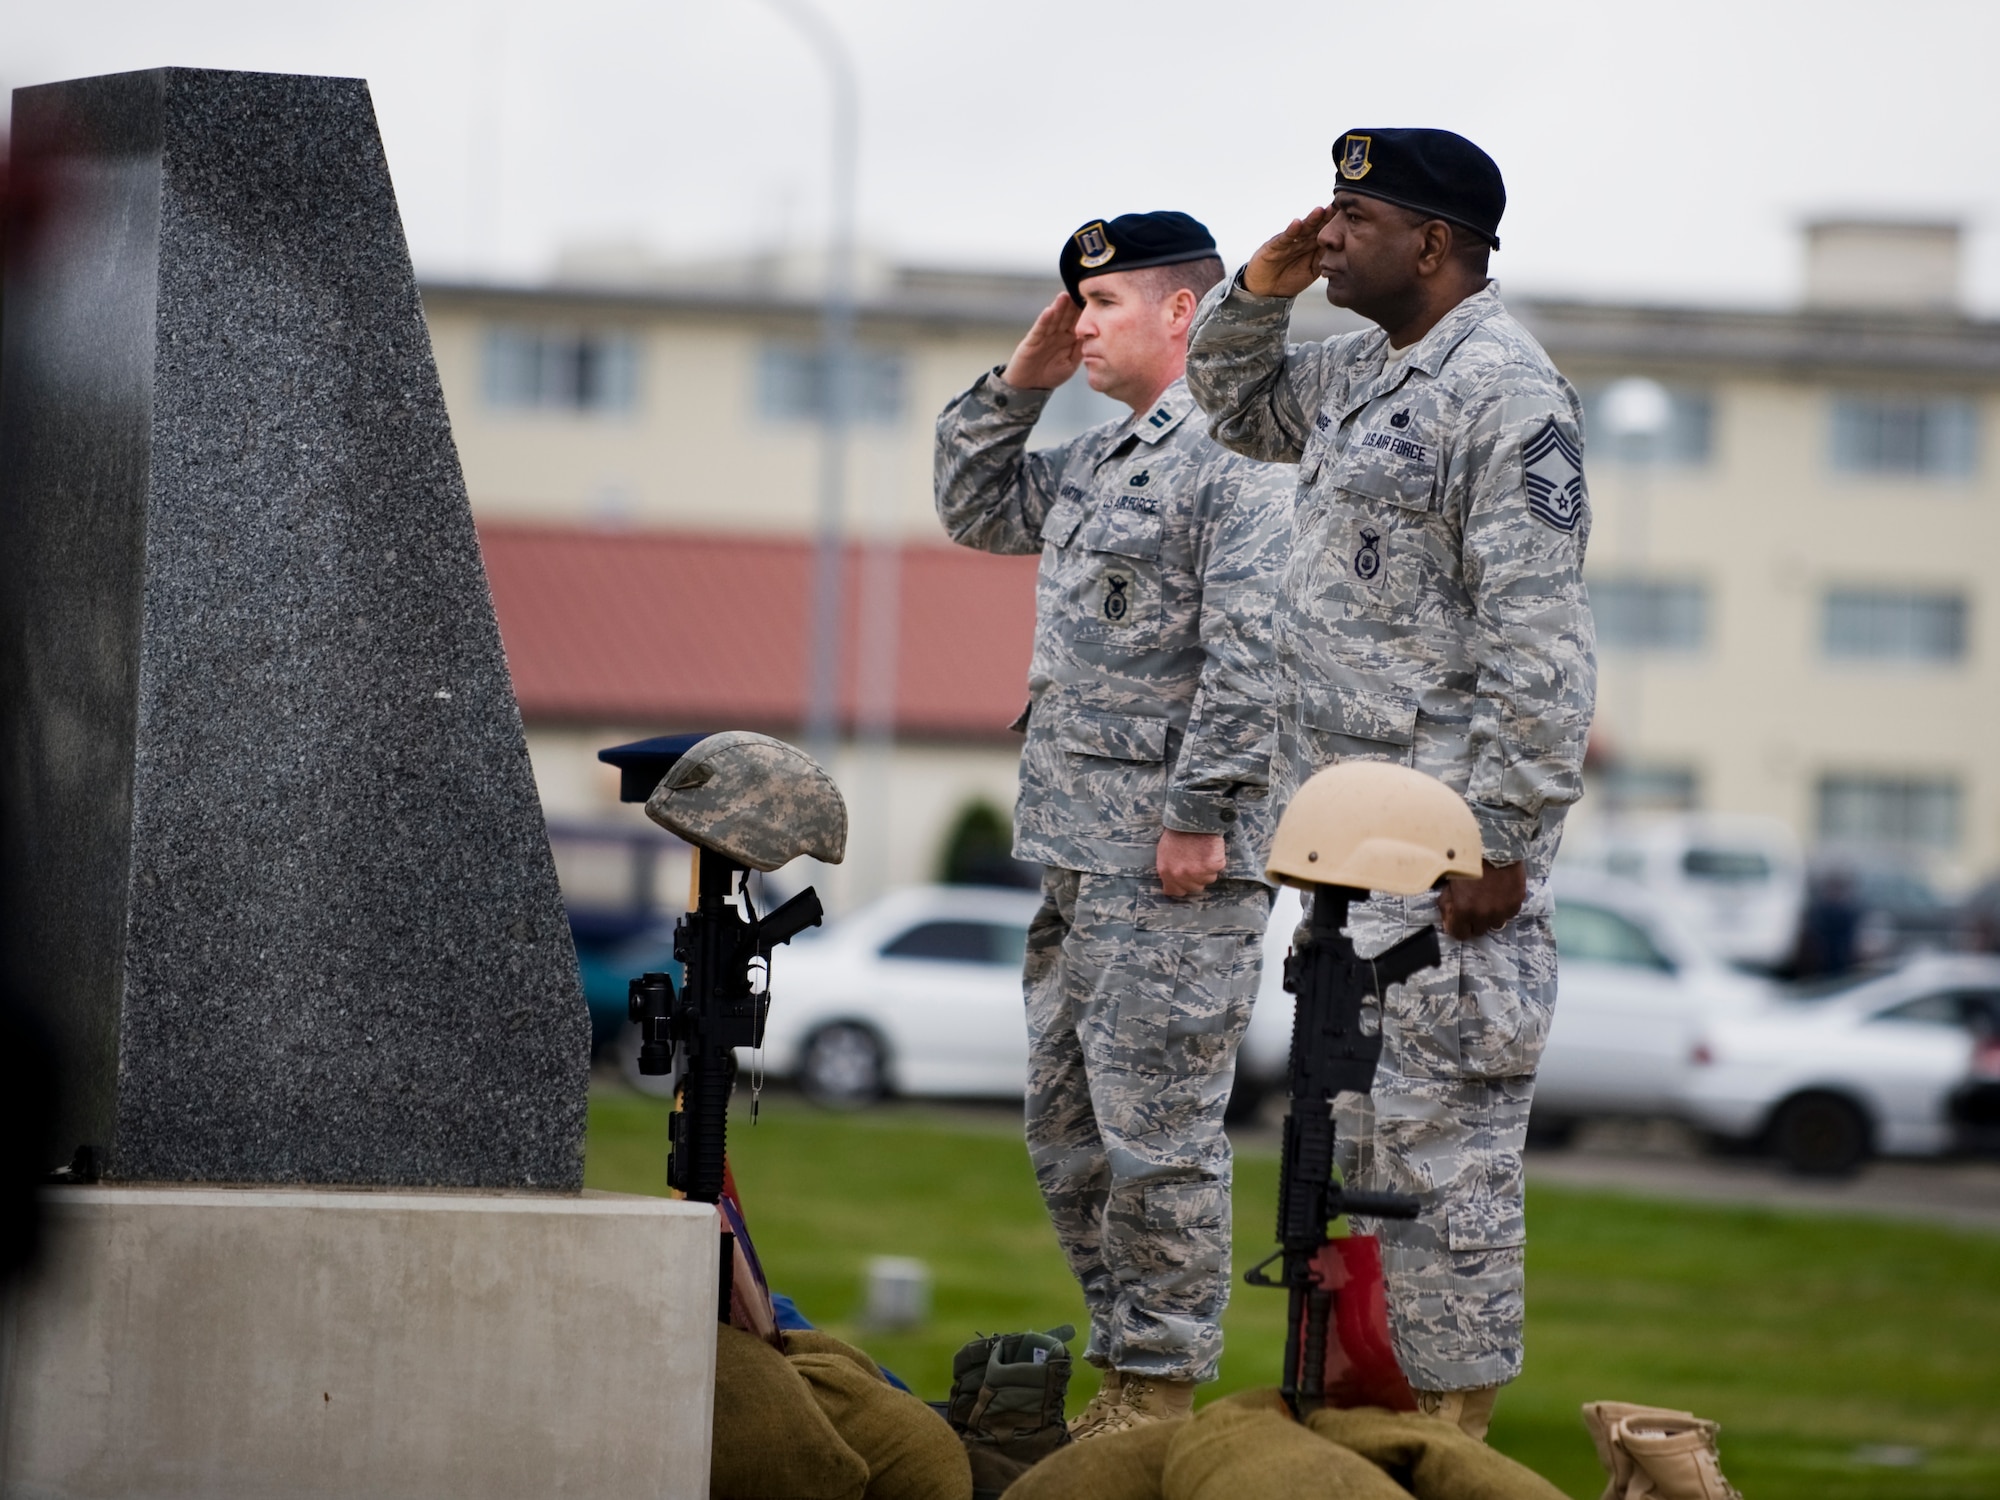 MISAWA AIR BASE, Japan -- Capt. Leo Martin, 35th Security Forces Squadron commander, and Chief Master Sgt. John Gammage, 35th SFS manager, take part in a retreat ceremony to wrap up National Police Week May 14 at Risner Circle. National Police Week is designated to honor fallen law enforcement officers and service members. (U.S. Air Force photo/Senior Airman Jamal D. Sutter)